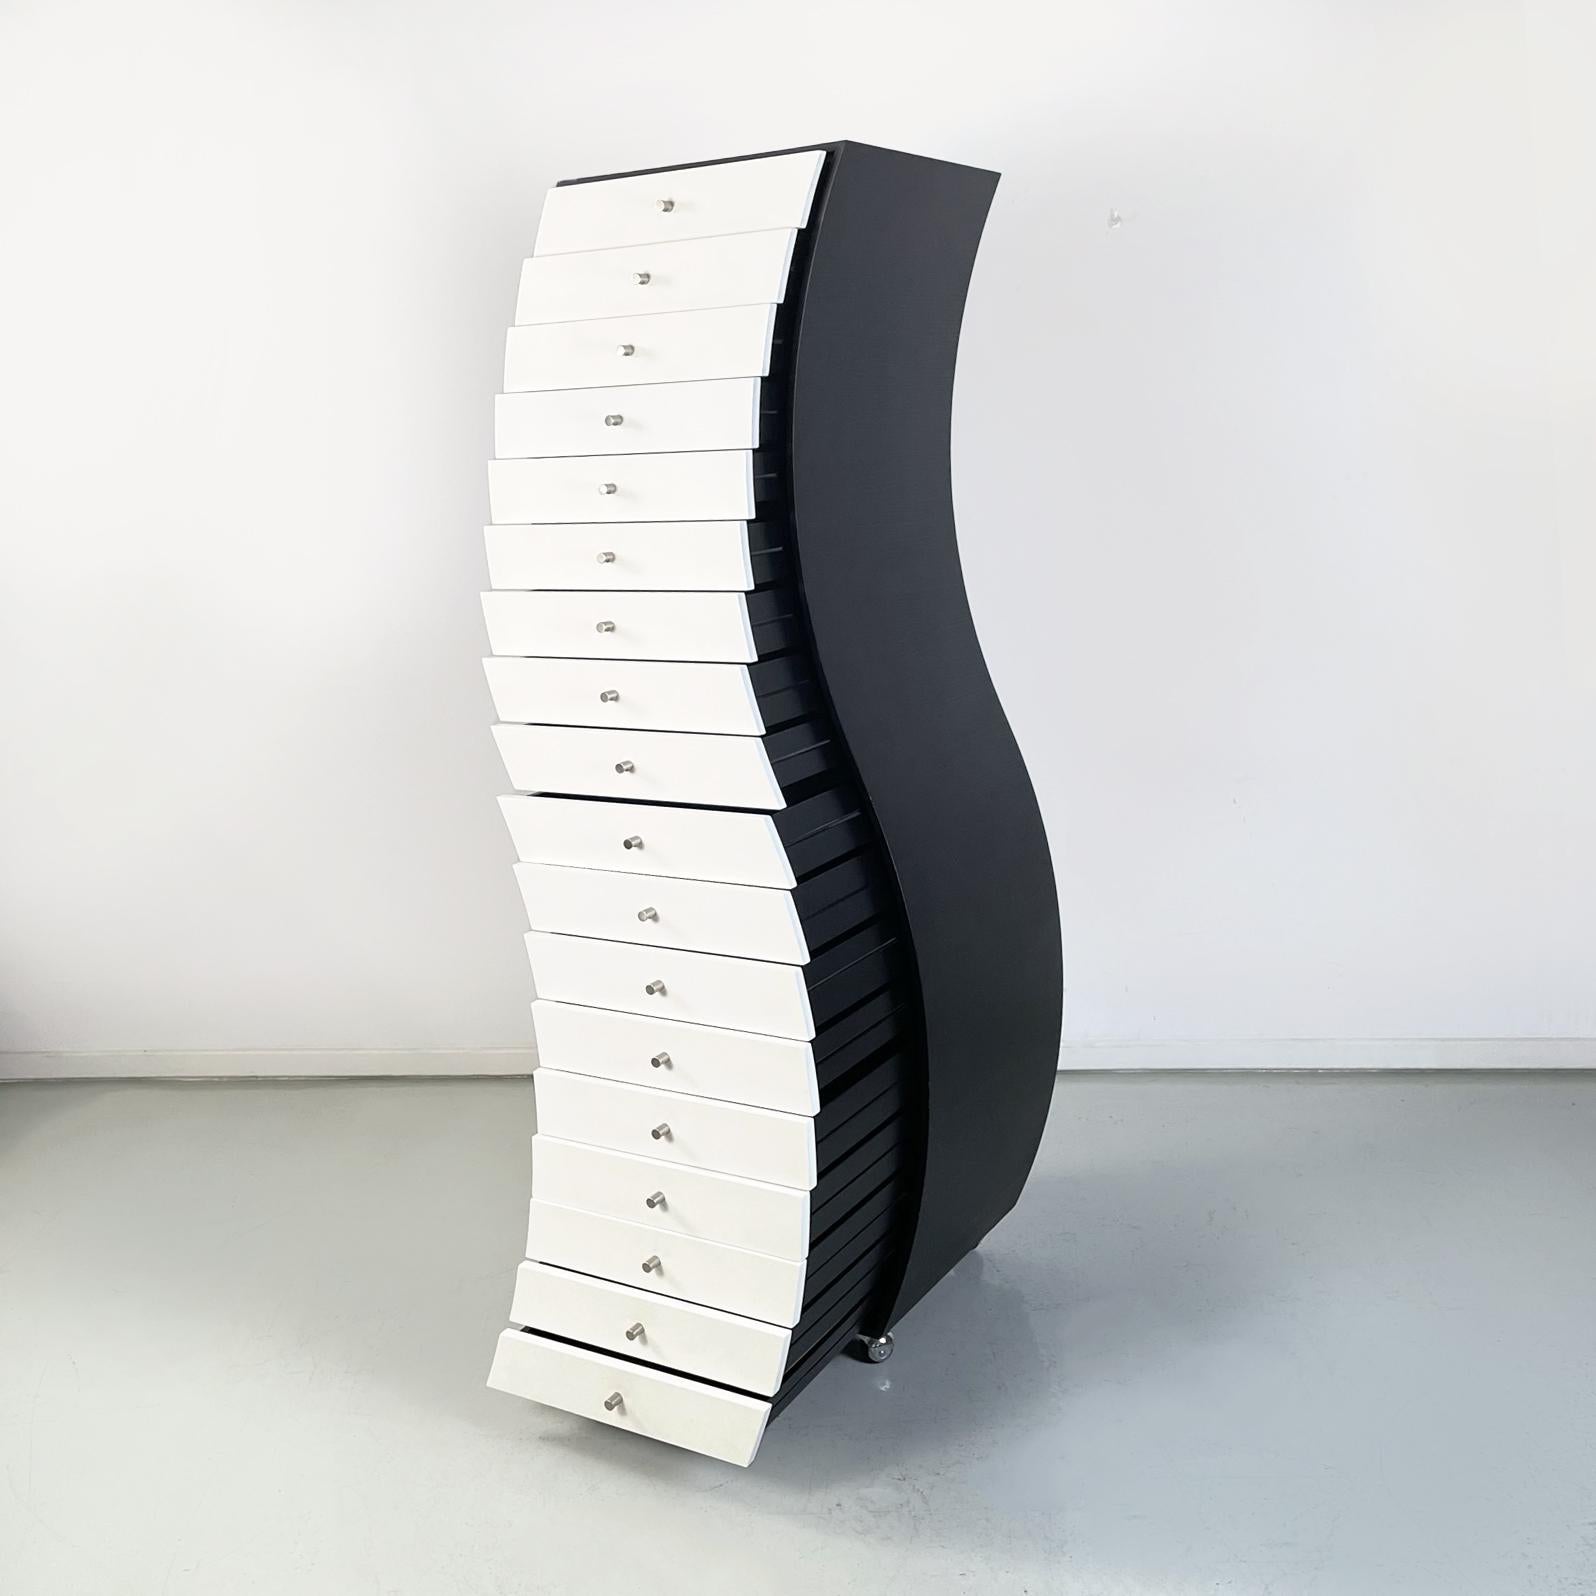 Italian modern Chest of drawers Side 1 by Shiro Kuramata for Cappellini, 1990s
Chest of drawers mod. Side 1 with a sinuous silhouette in wood. The black painted wooden structure supports a series of 18 white wooden drawers with cylindrical handles